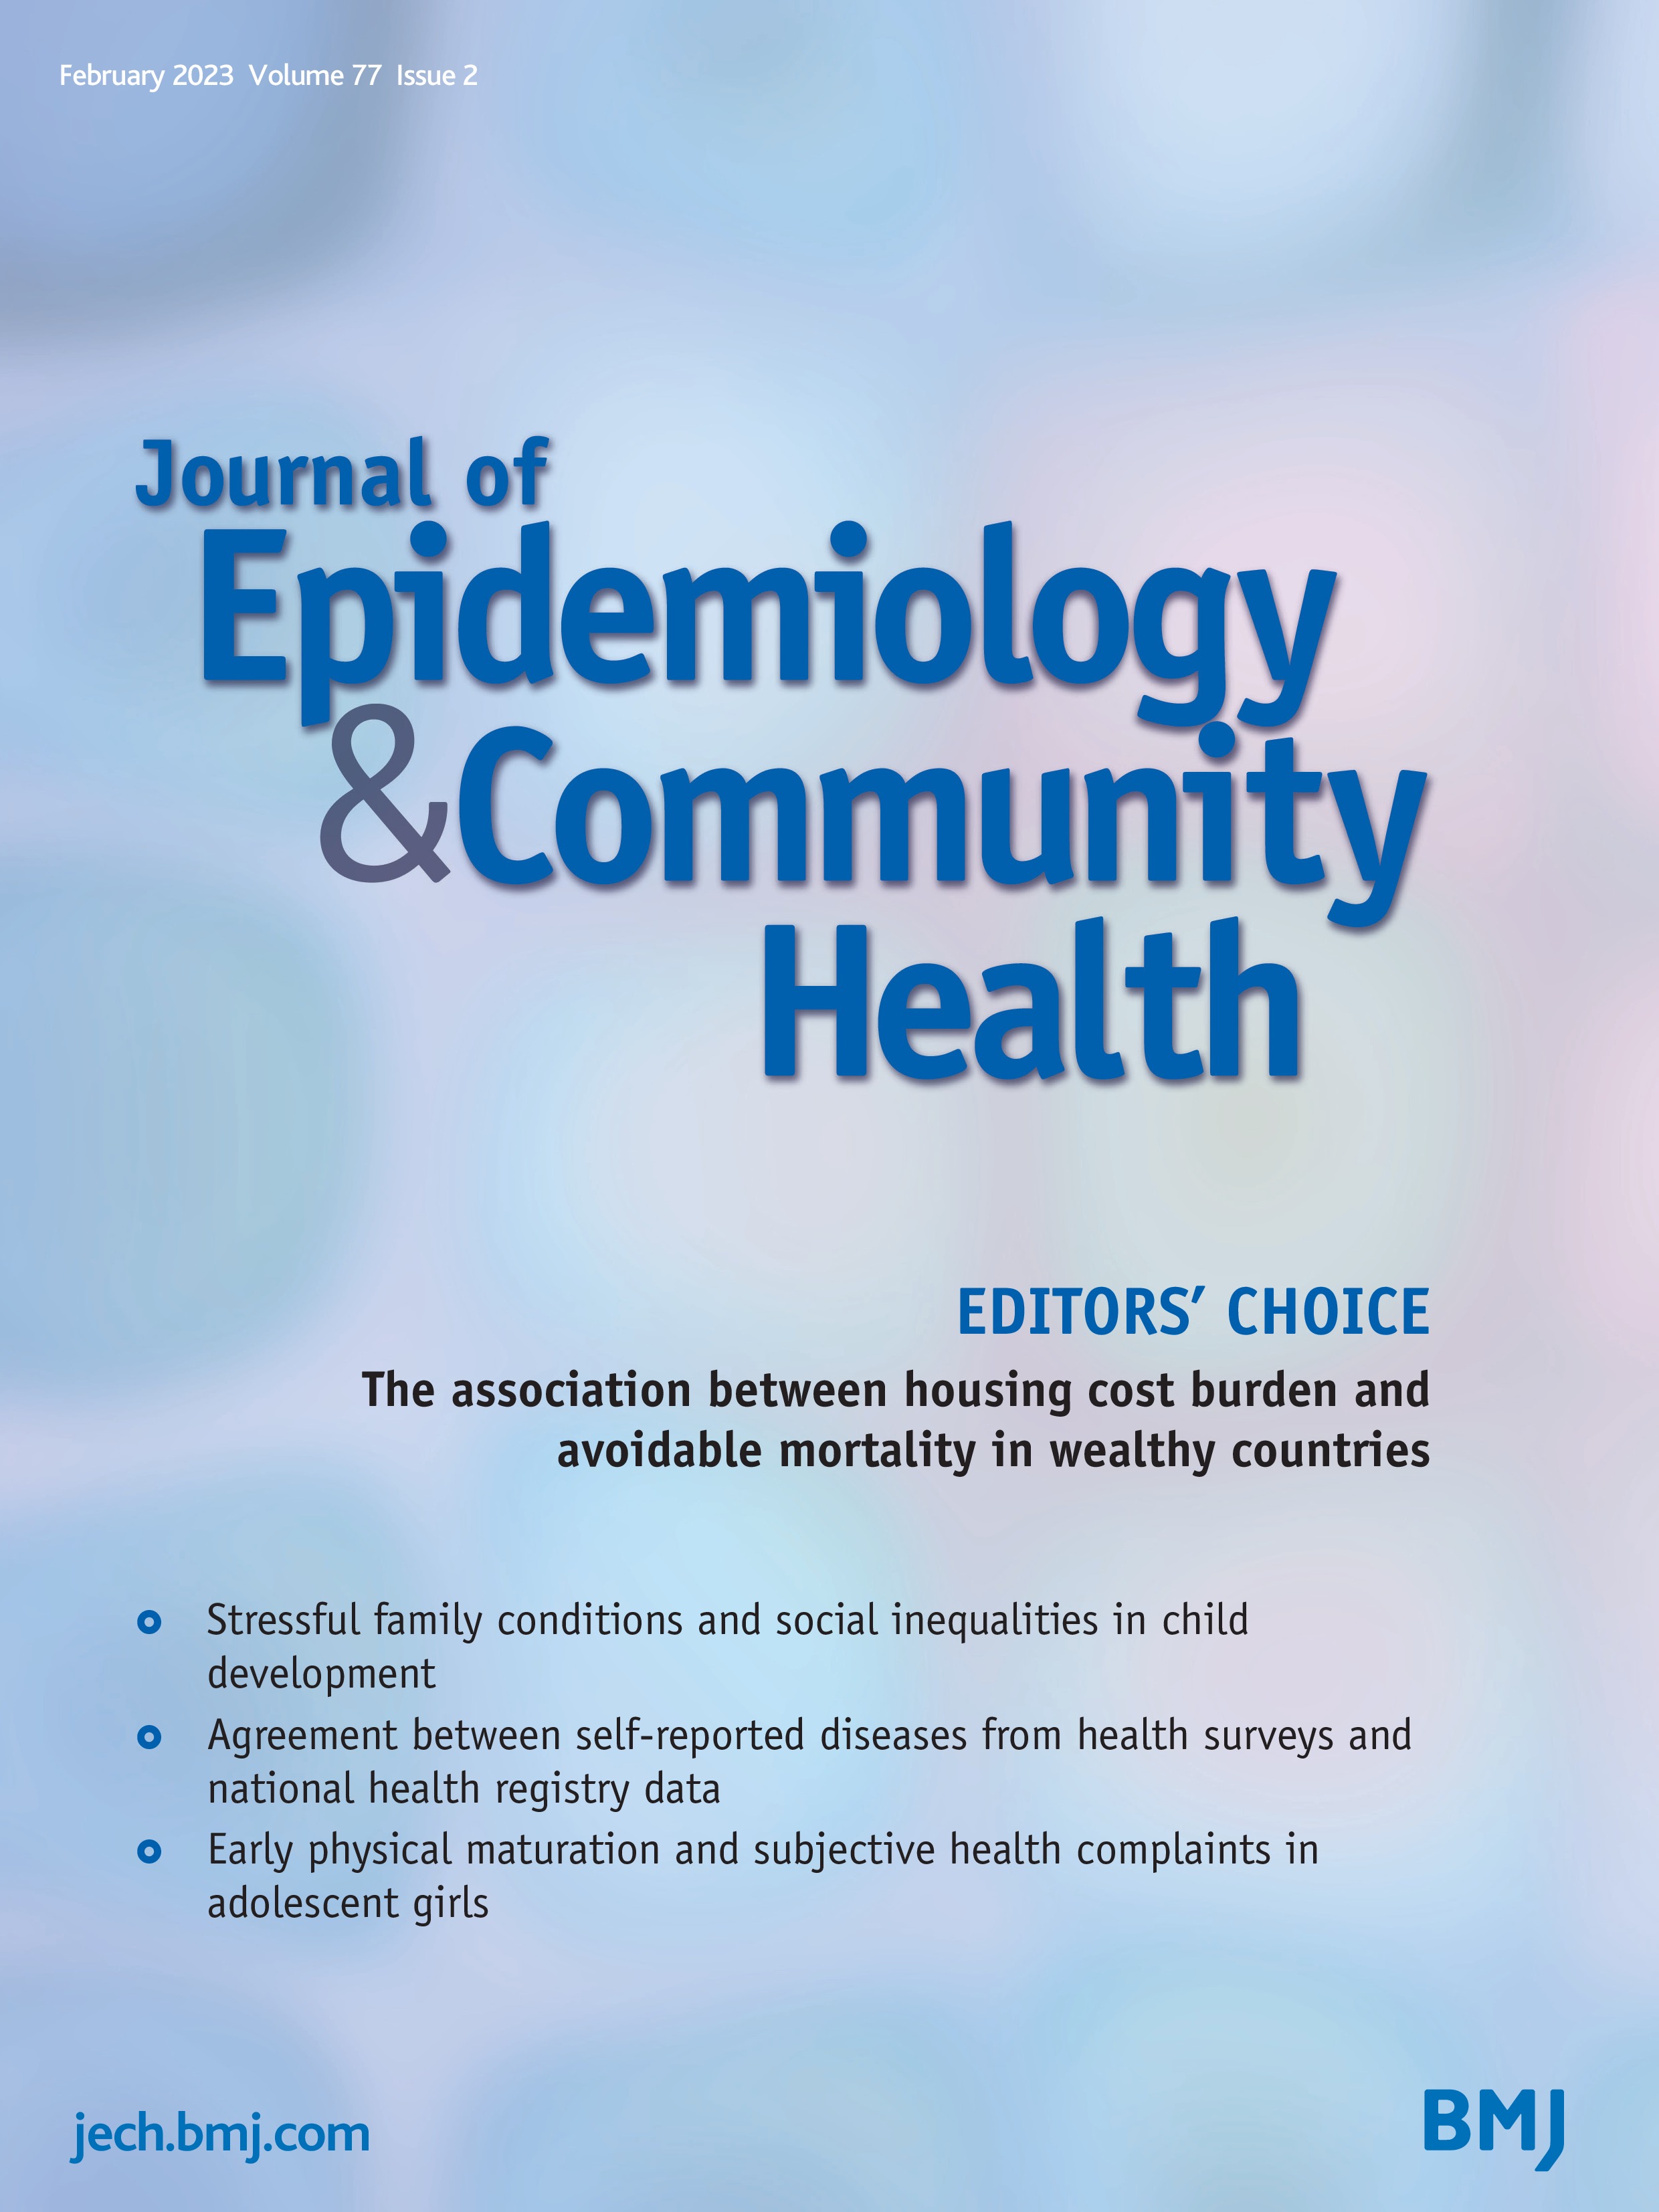 Social inequalities in child development: the role of differential exposure and susceptibility to stressful family conditions